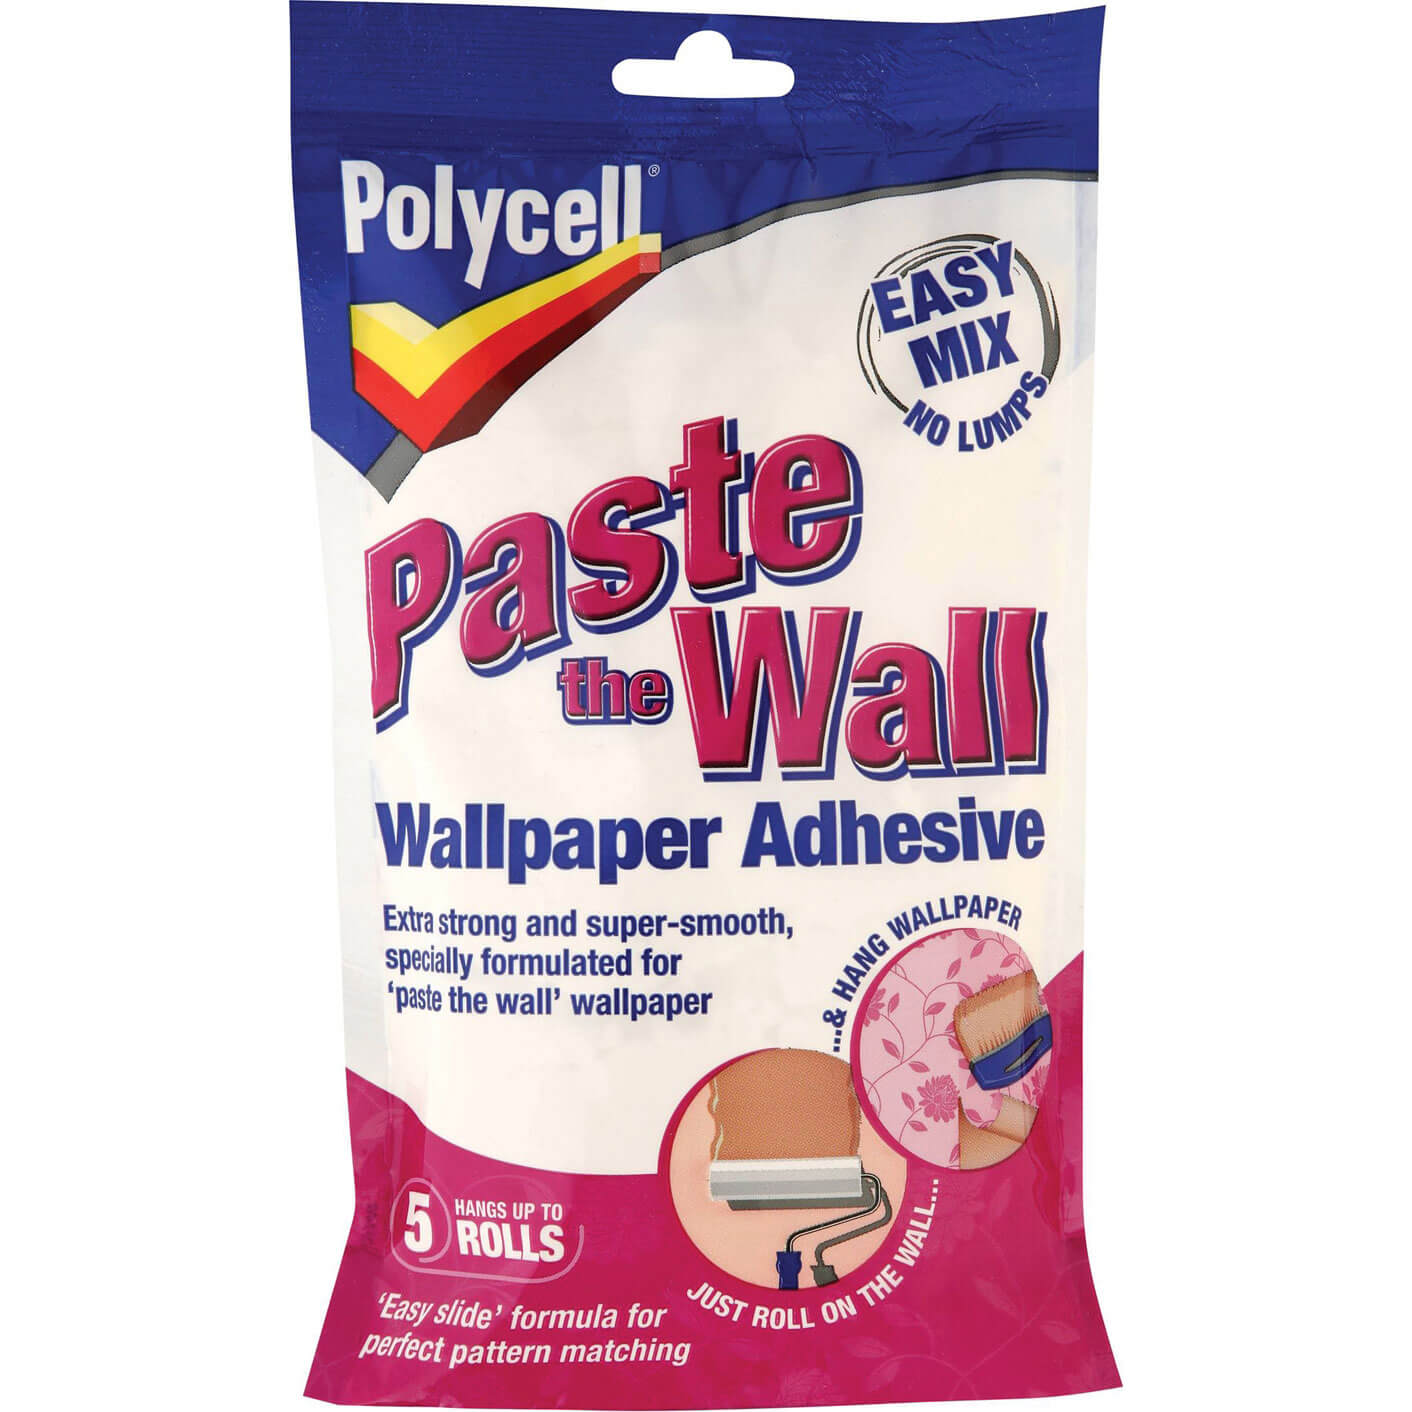 Polycell Paste The Wall Powder Wallpaper Adhesive 5 Roll